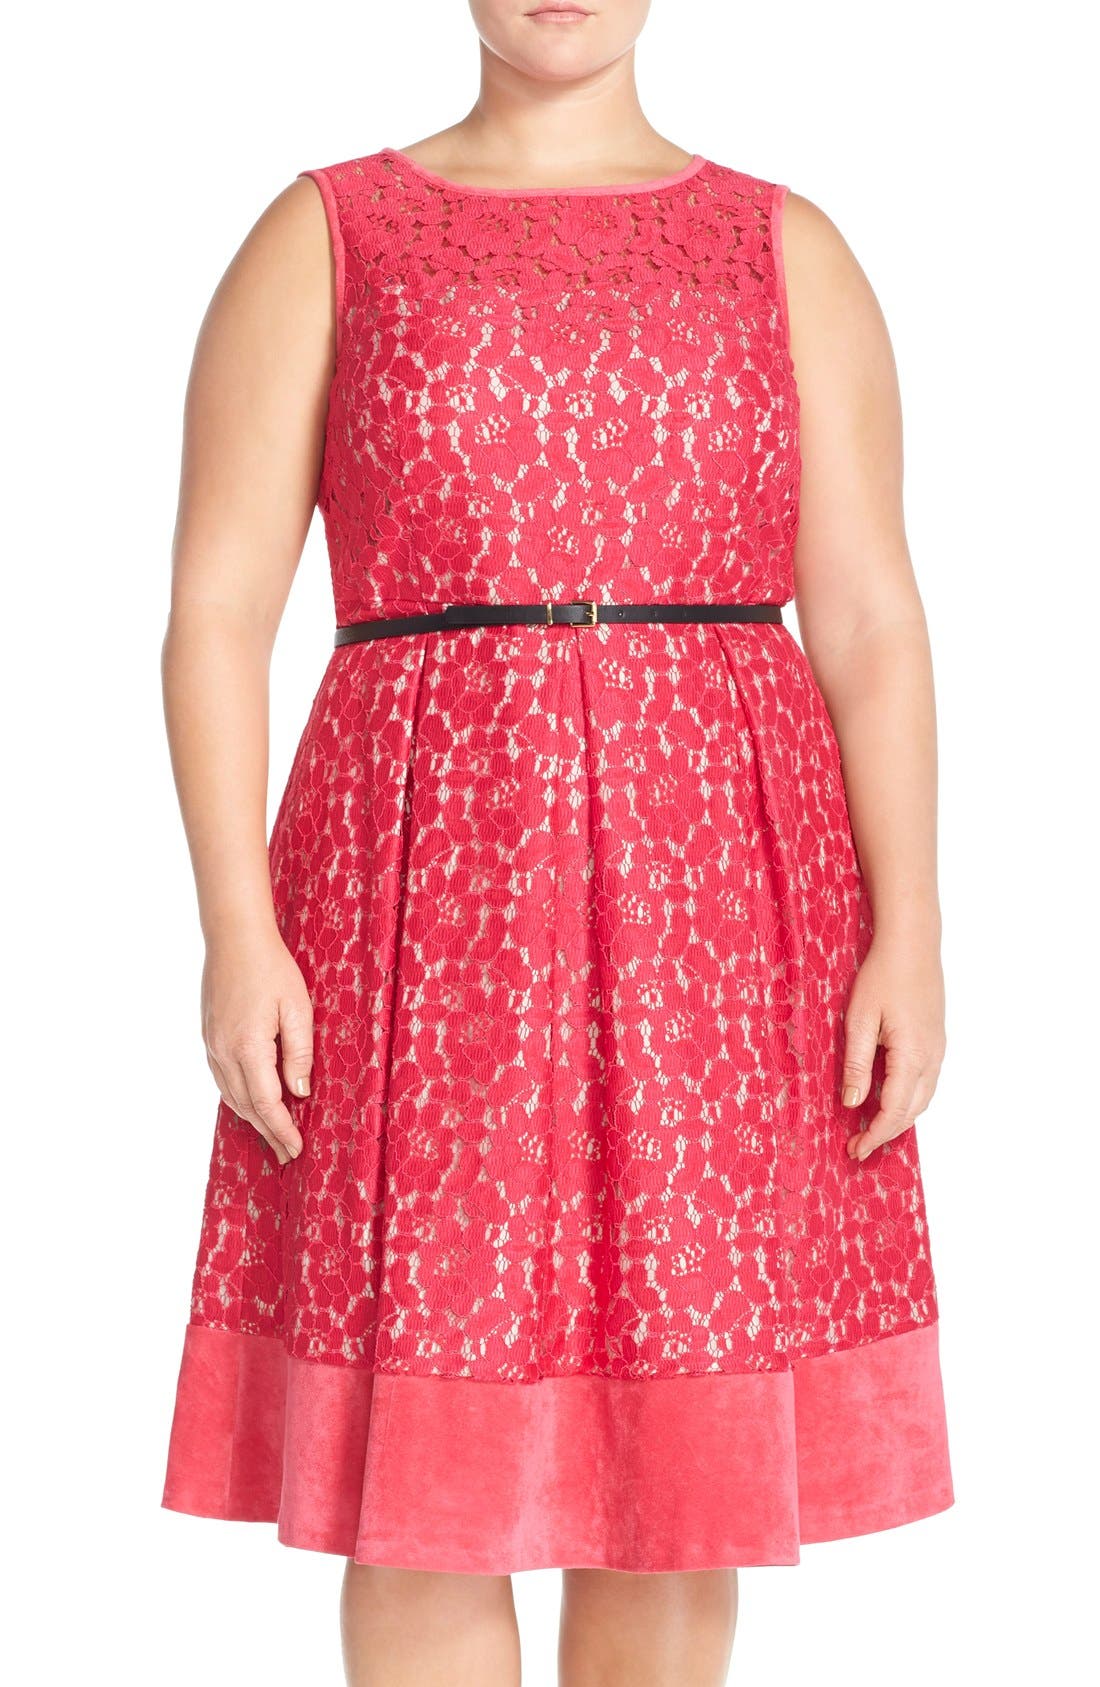 calvin klein red lace dress